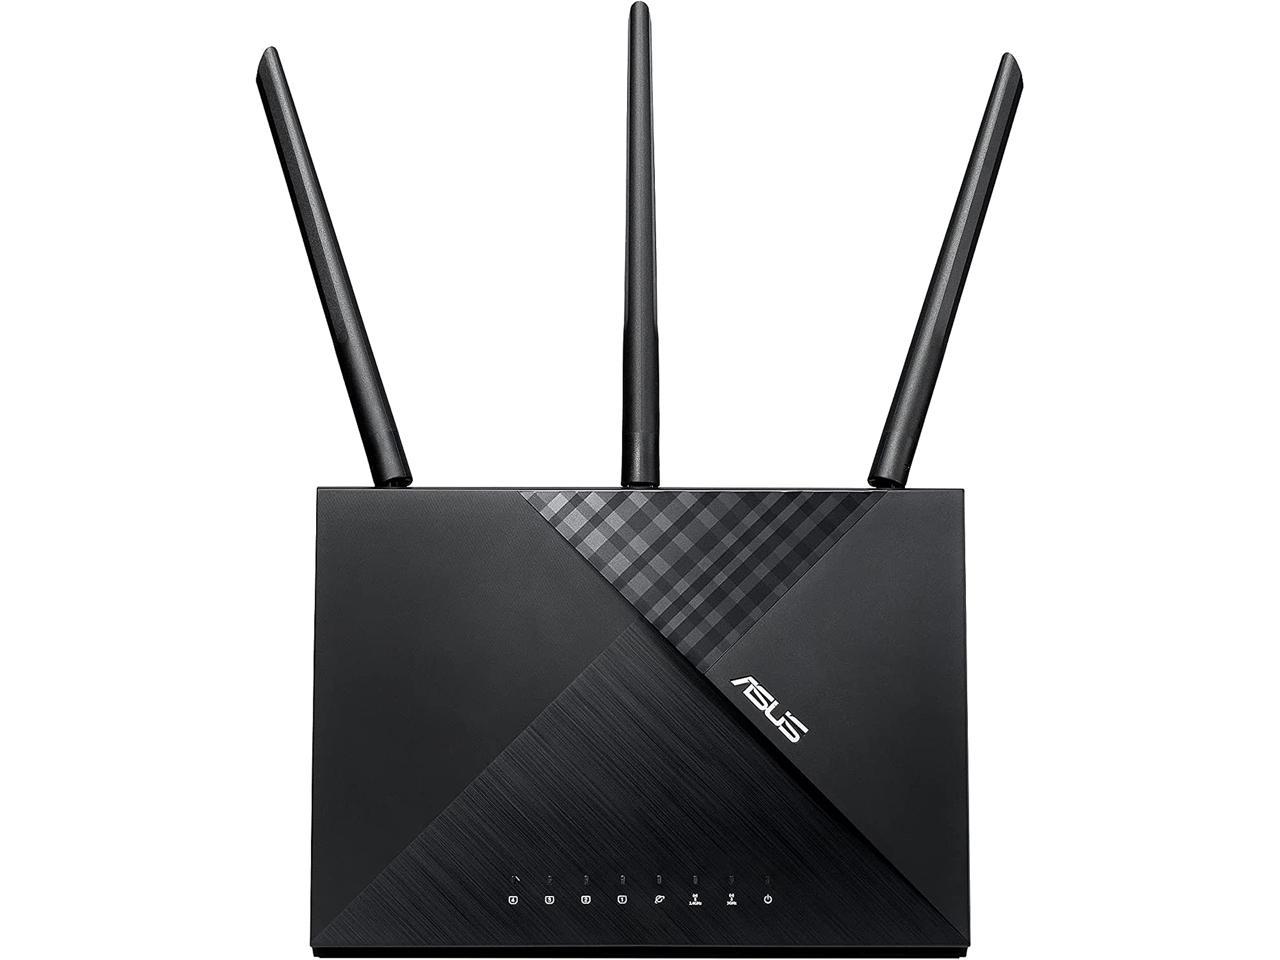 ASUS AC1900 WiFi Router (RT-AC67P) - Dual Band Wireless Internet Router, Easy Setup, VPN, Parental Control, AiRadar Beamforming Technology $49.99